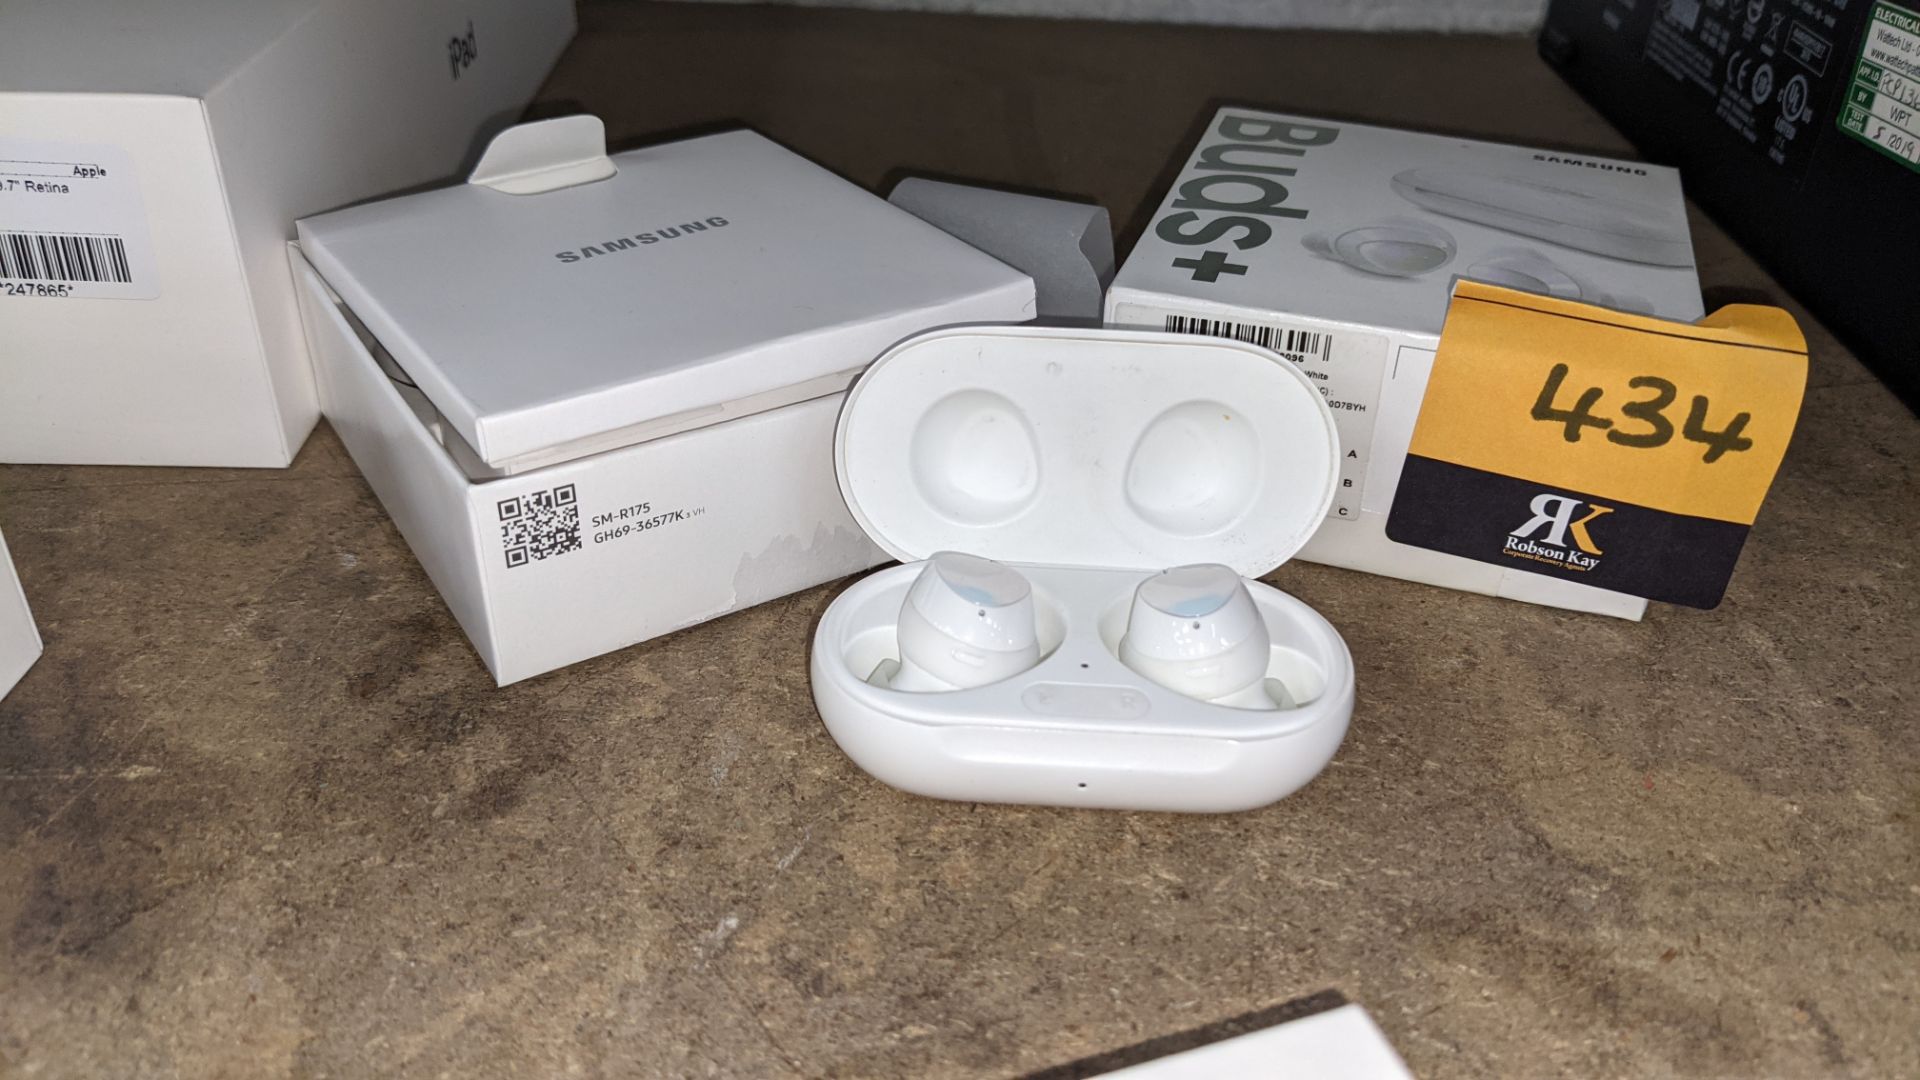 Samsung Galaxy Buds+ wireless earphones including wireless charging case, box & book pack. NB Water - Image 5 of 16